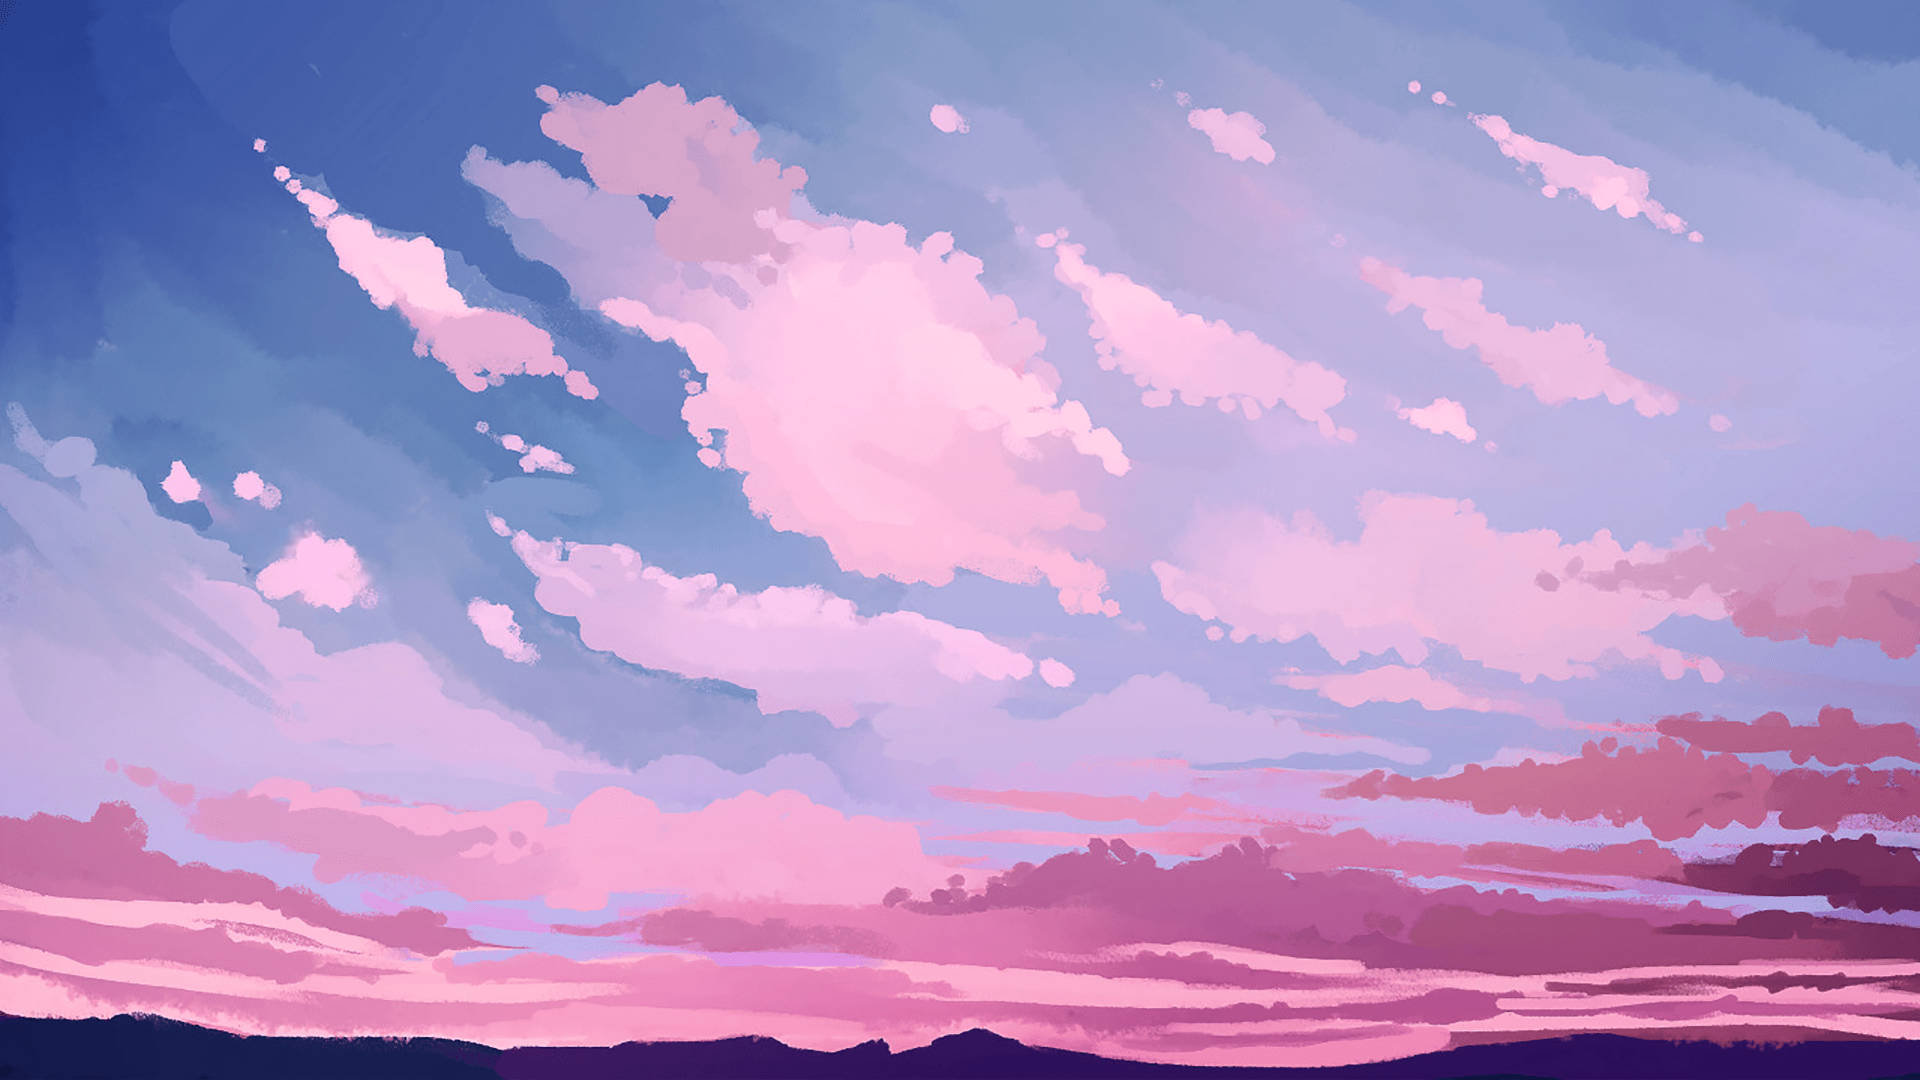 Cloud And Mountain Aesthetic Pink Desktop Background